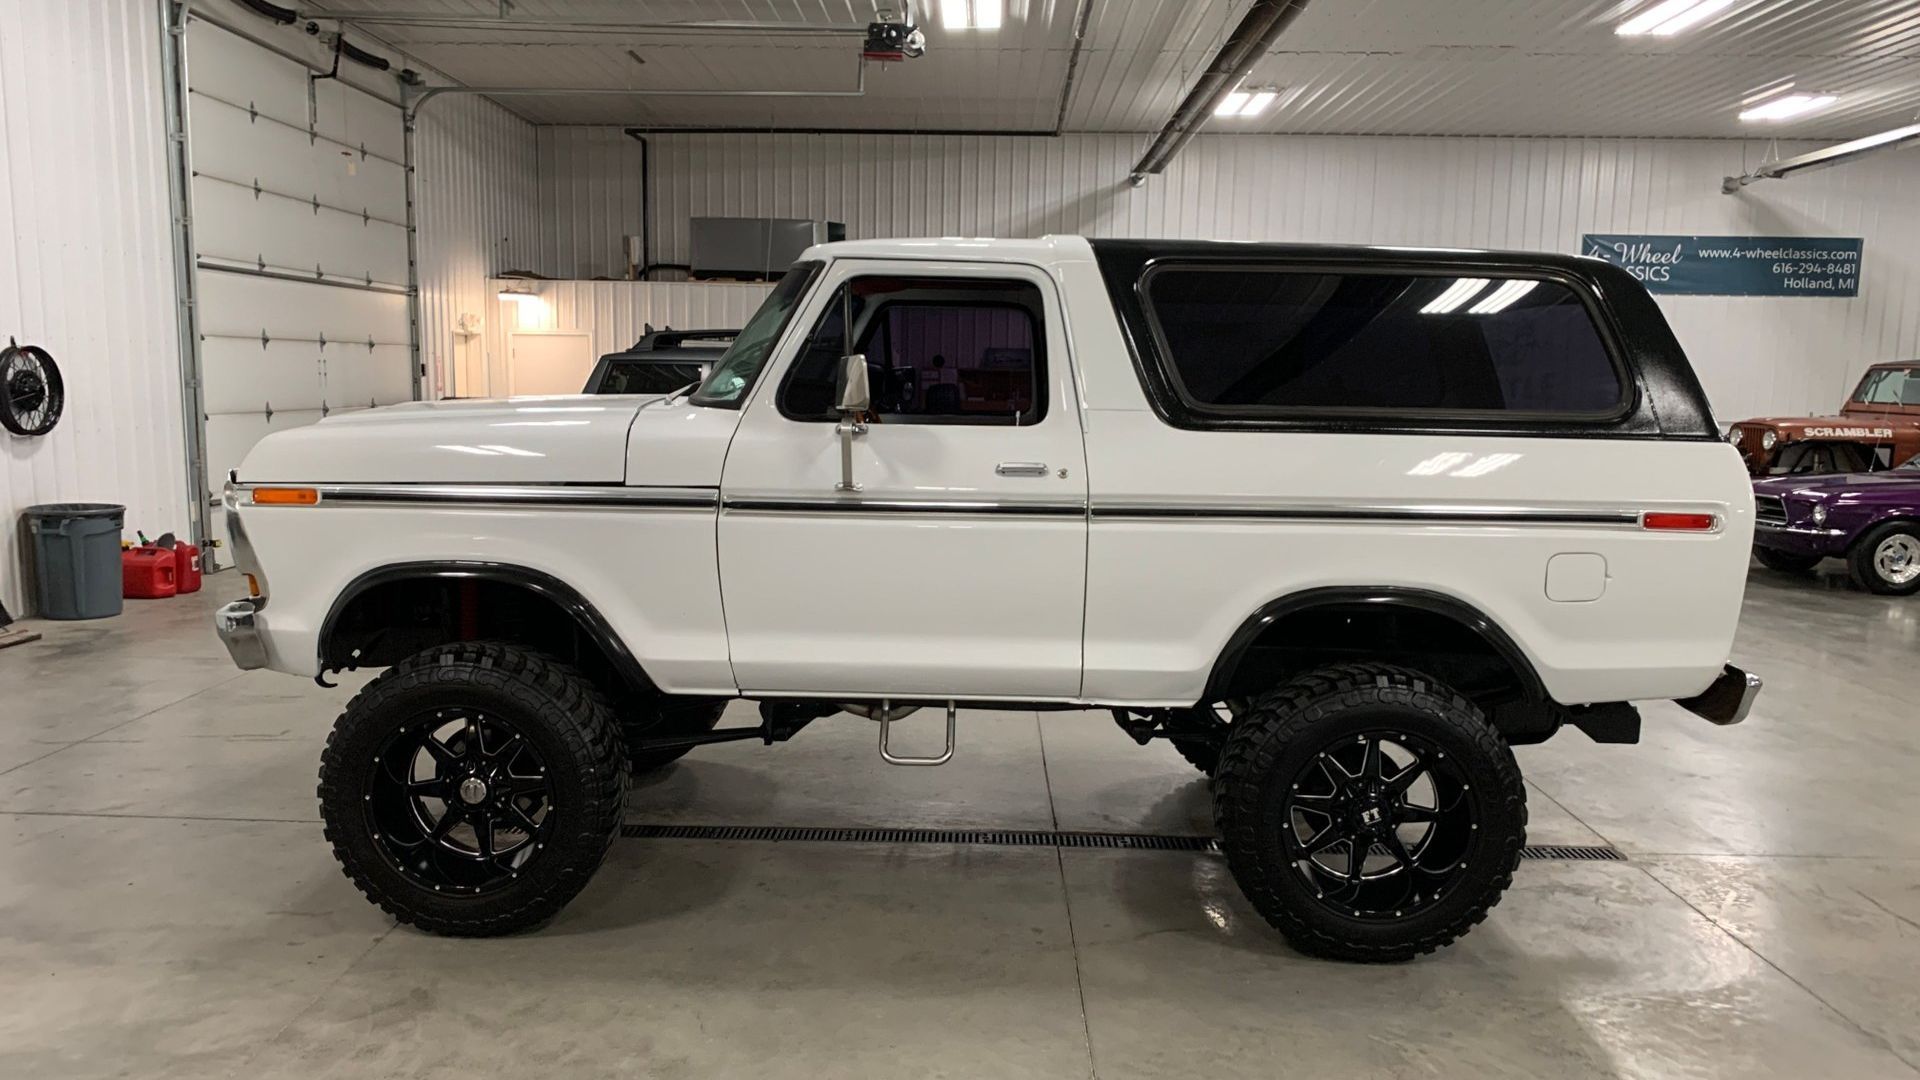 Go Somewhere Worthwhile In A 1974 Ford Bronco 